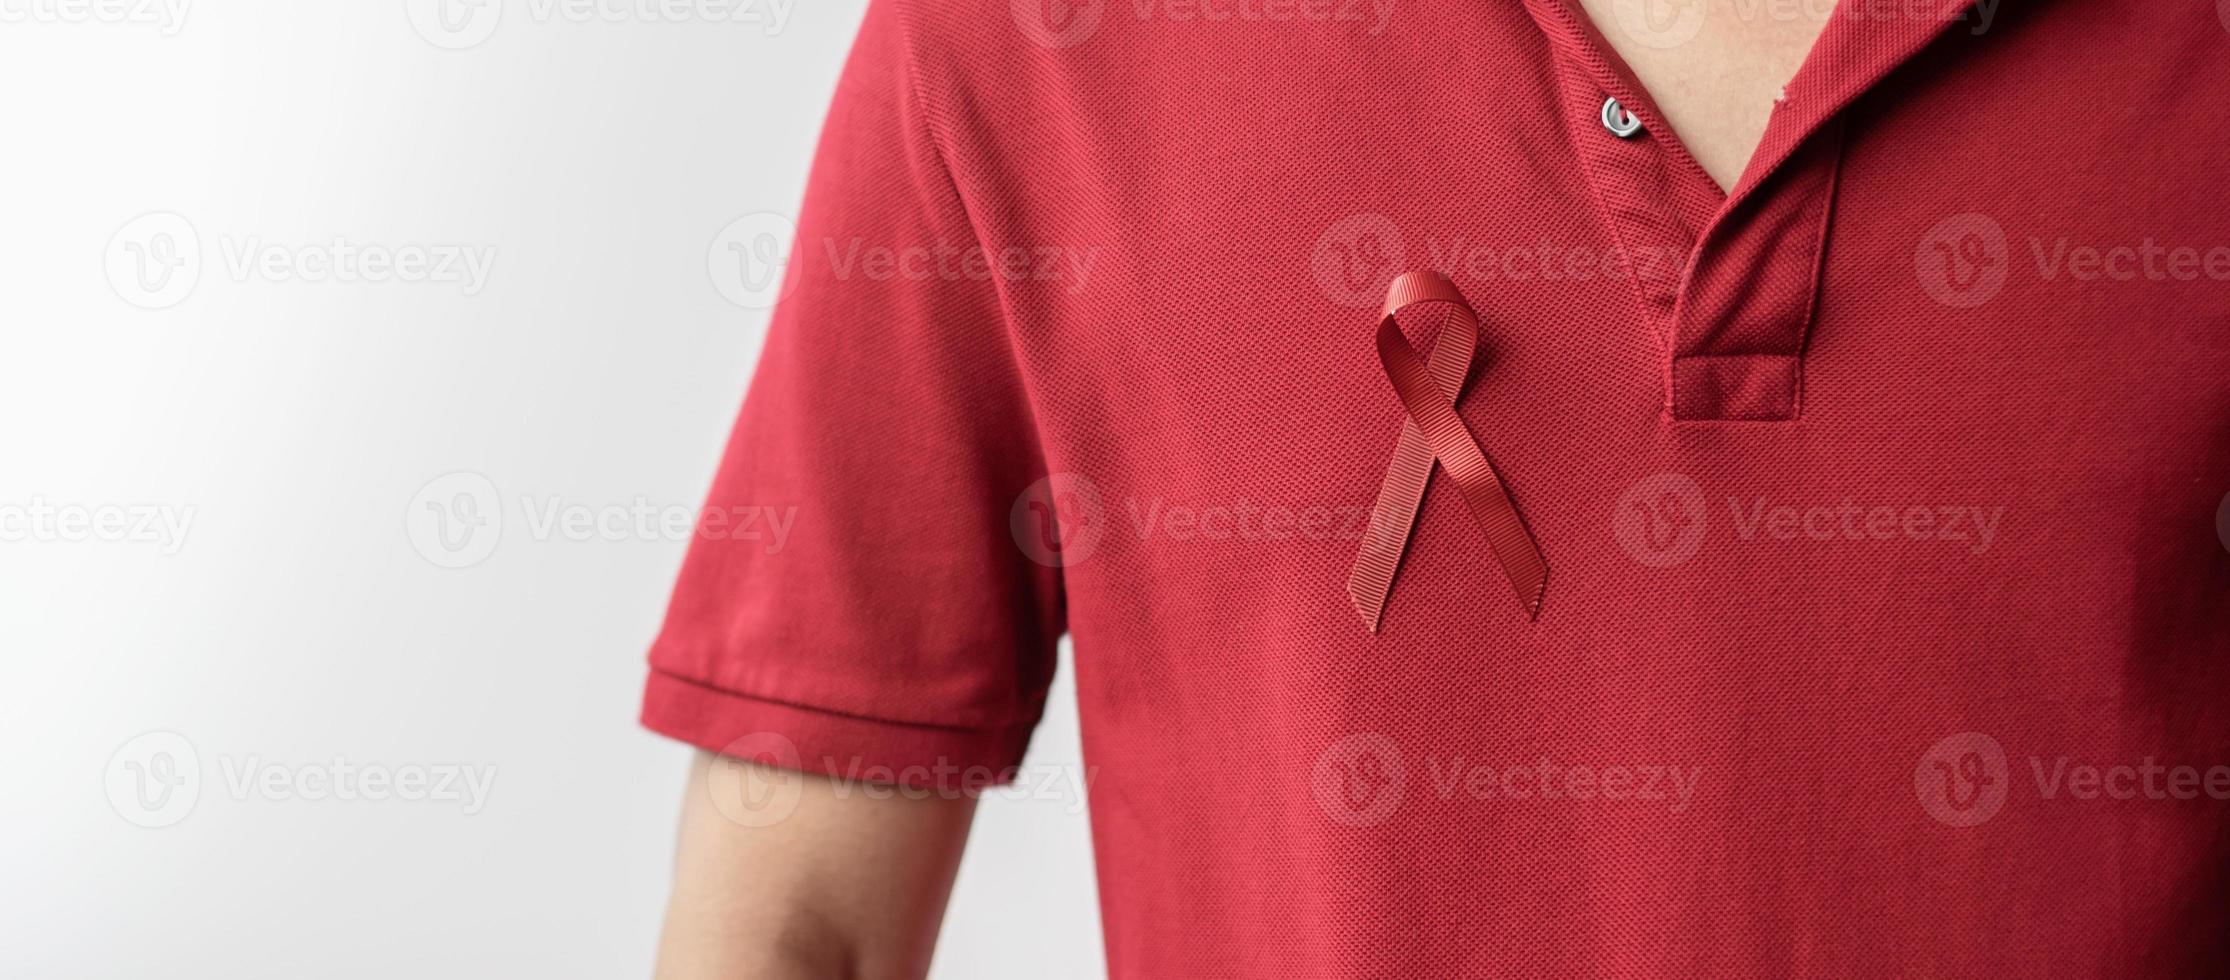 Burgundy Red Ribbon for March multiple myeloma Cancer and December World Aids Day Awareness month. Healthcare and world cancer day concept photo